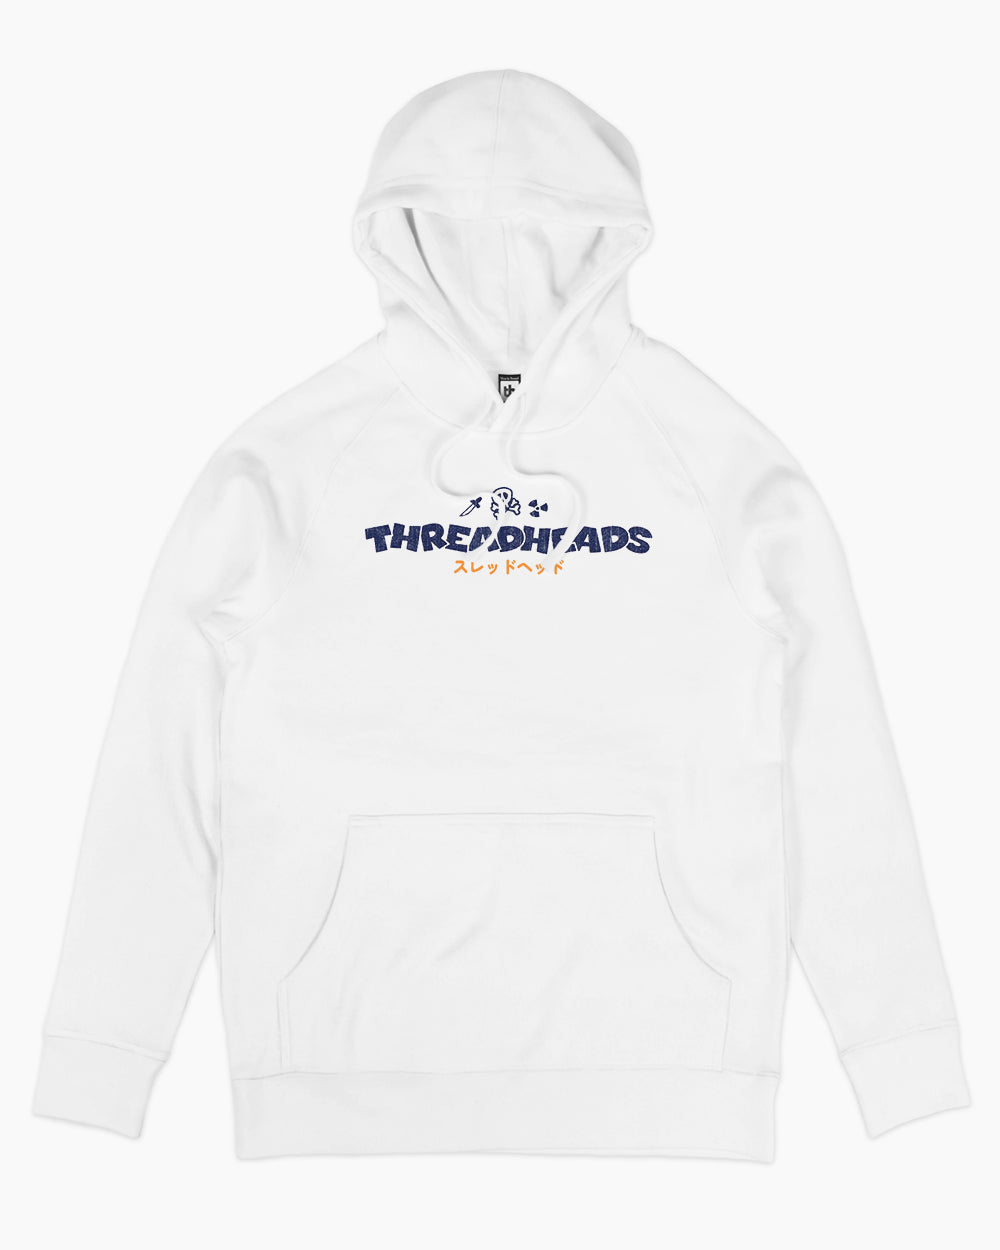 Here Comes Trouble Hoodie Australia Online #colour_white